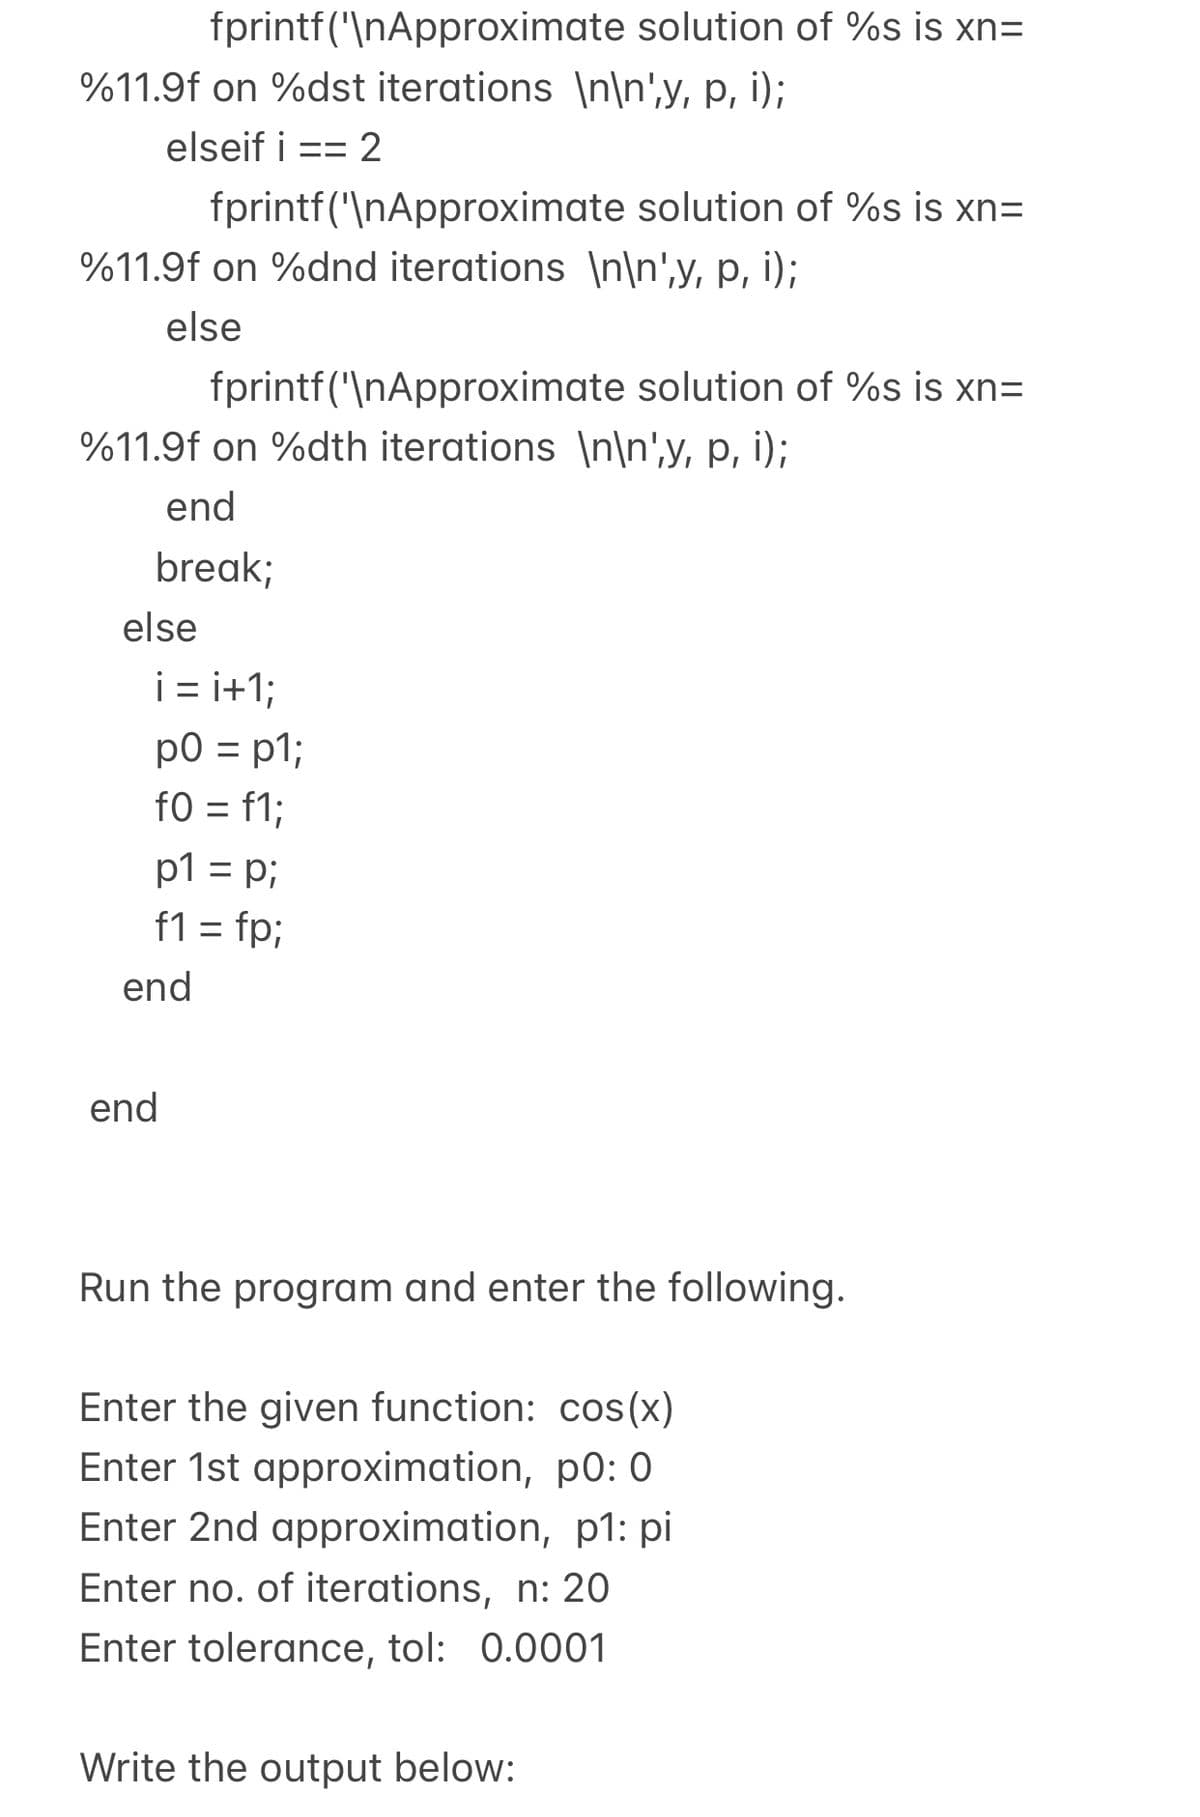 fprintf("\nApproximate solution of %s is xn=
%11.9f on %dst iterations \n\n',y, p, i);
elseif i
== 2
fprintf("\nApproximate solution of %s is xn=
%11.9f on %dnd iterations \n\n',y, p, i);
else
fprintf("\nApproximate solution of %s is xn=
%11.9f on %dth iterations \n\n',y, p, i);
end
break;
else
i = i+1;
p0 = p1;
f0 = f1;
p1 = p;
f1 = fp;
%3D
%3D
end
end
Run the program and enter the following.
Enter the given function: cos(x)
Enter 1st approximation, p0: 0
Enter 2nd approximation, p1: pi
Enter no. of iterations, n: 20
Enter tolerance, tol: 0.0001
Write the output below:
